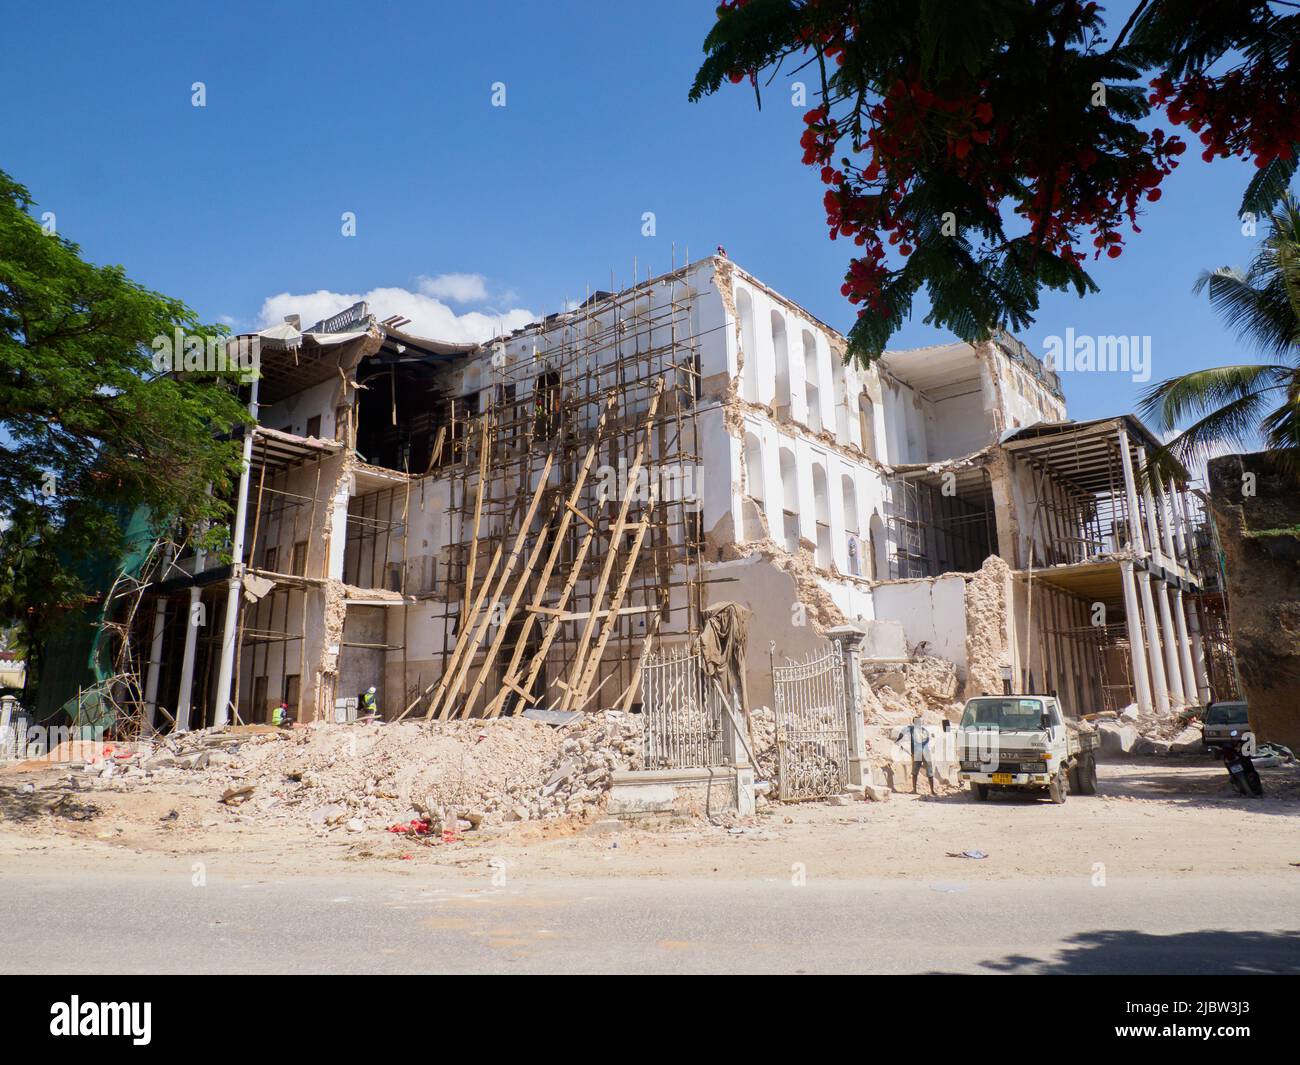 Stone Town, Zanzibar - Jan, 2021: Collapsed House of Wonders or Palace of Wonders (Arabic: Beit-el-Ajaib) which housed the Museum of History and Cultu Stock Photo